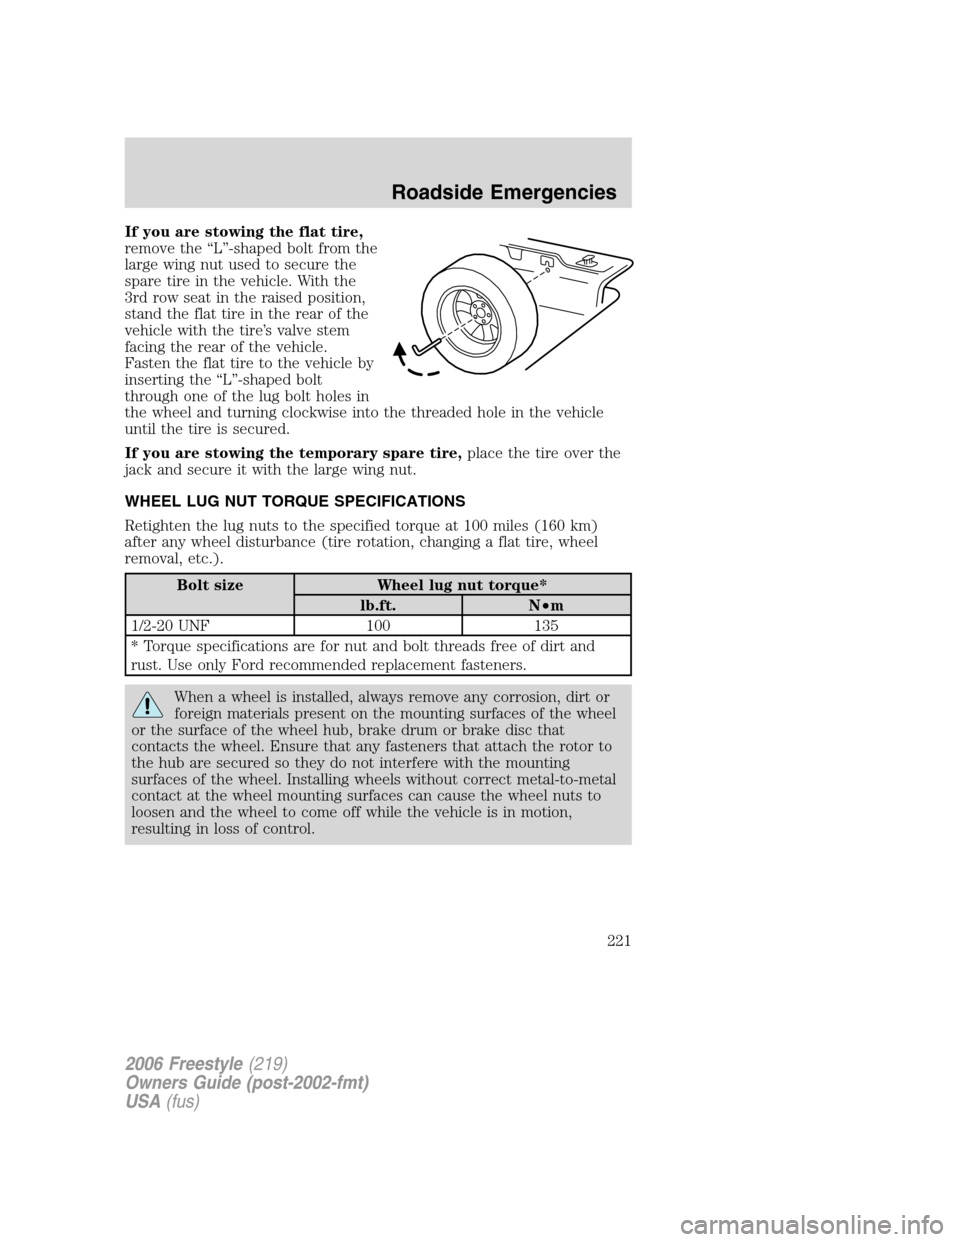 FORD FREESTYLE 2006 1.G Owners Manual If you are stowing the flat tire,
remove the “L”-shaped bolt from the
large wing nut used to secure the
spare tire in the vehicle. With the
3rd row seat in the raised position,
stand the flat tire